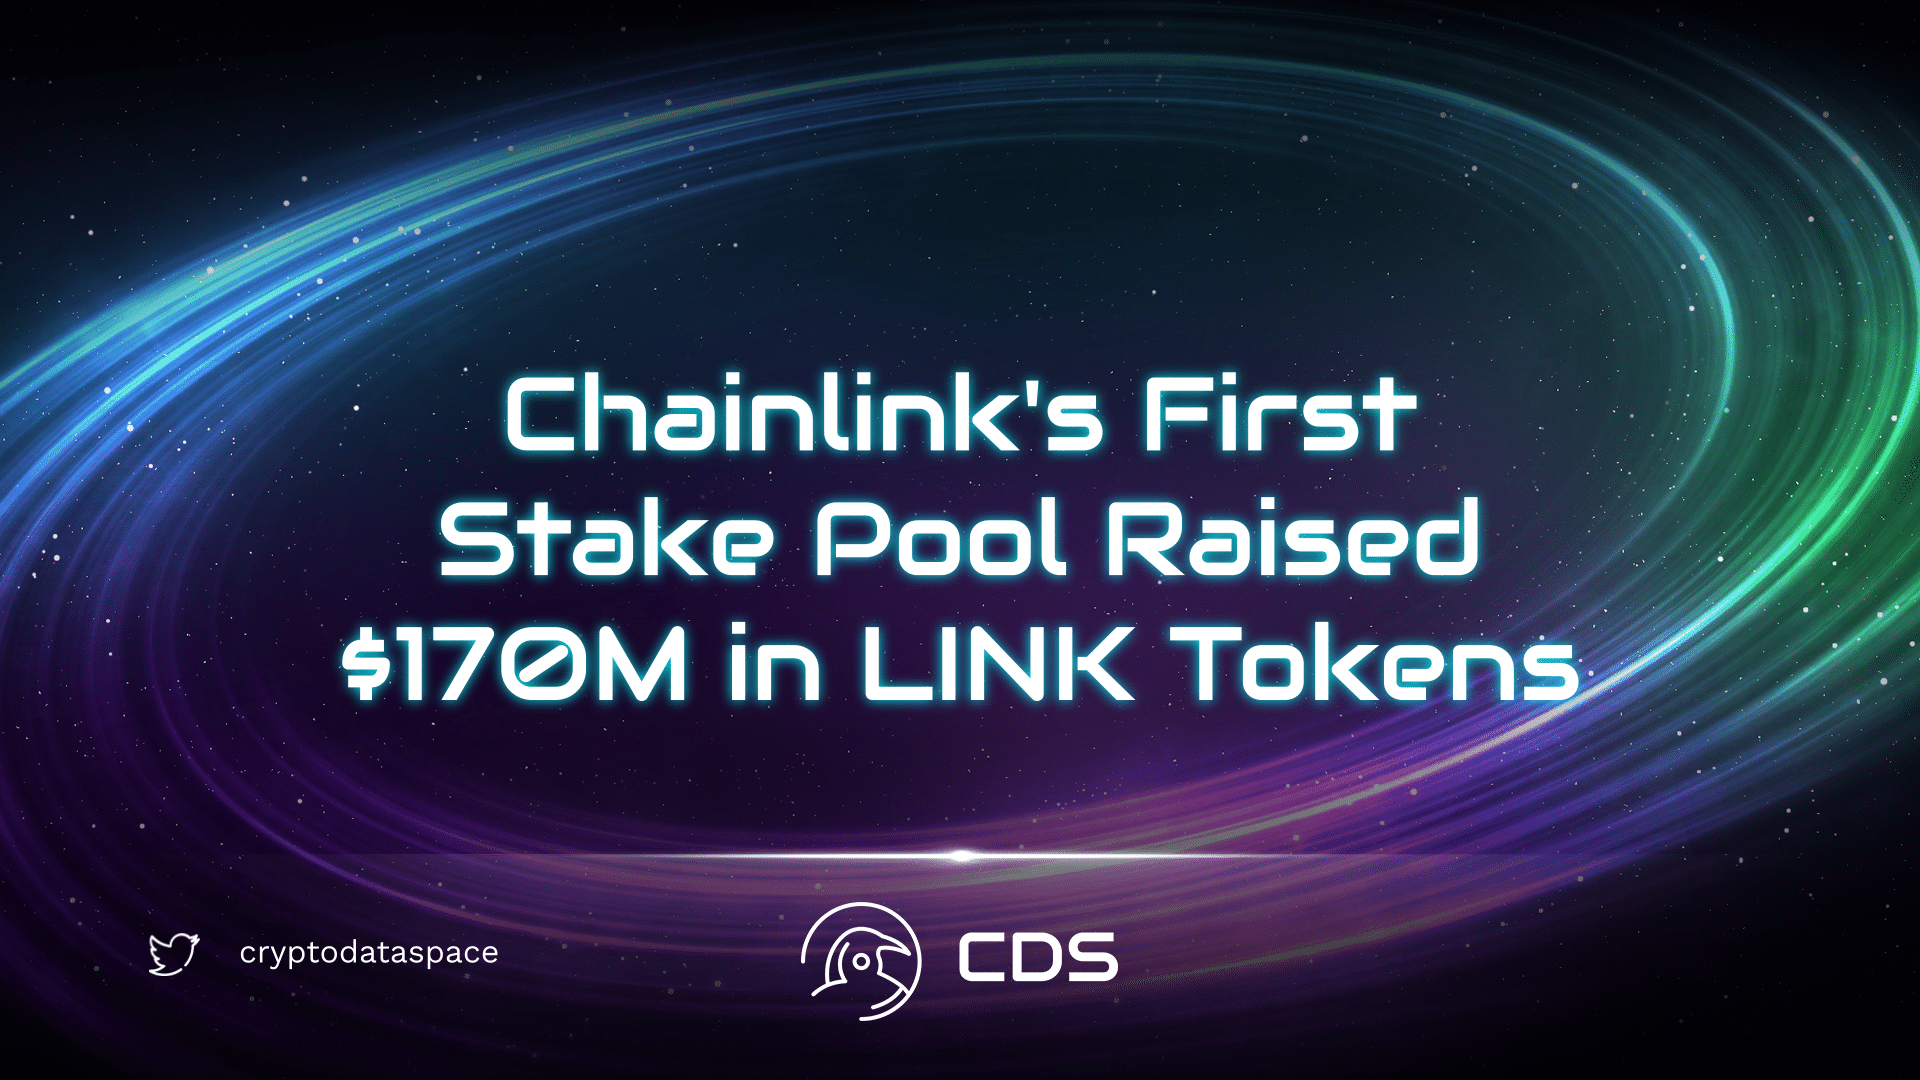 Chainlink's First Stake Pool Raised $170M in LINK Tokens